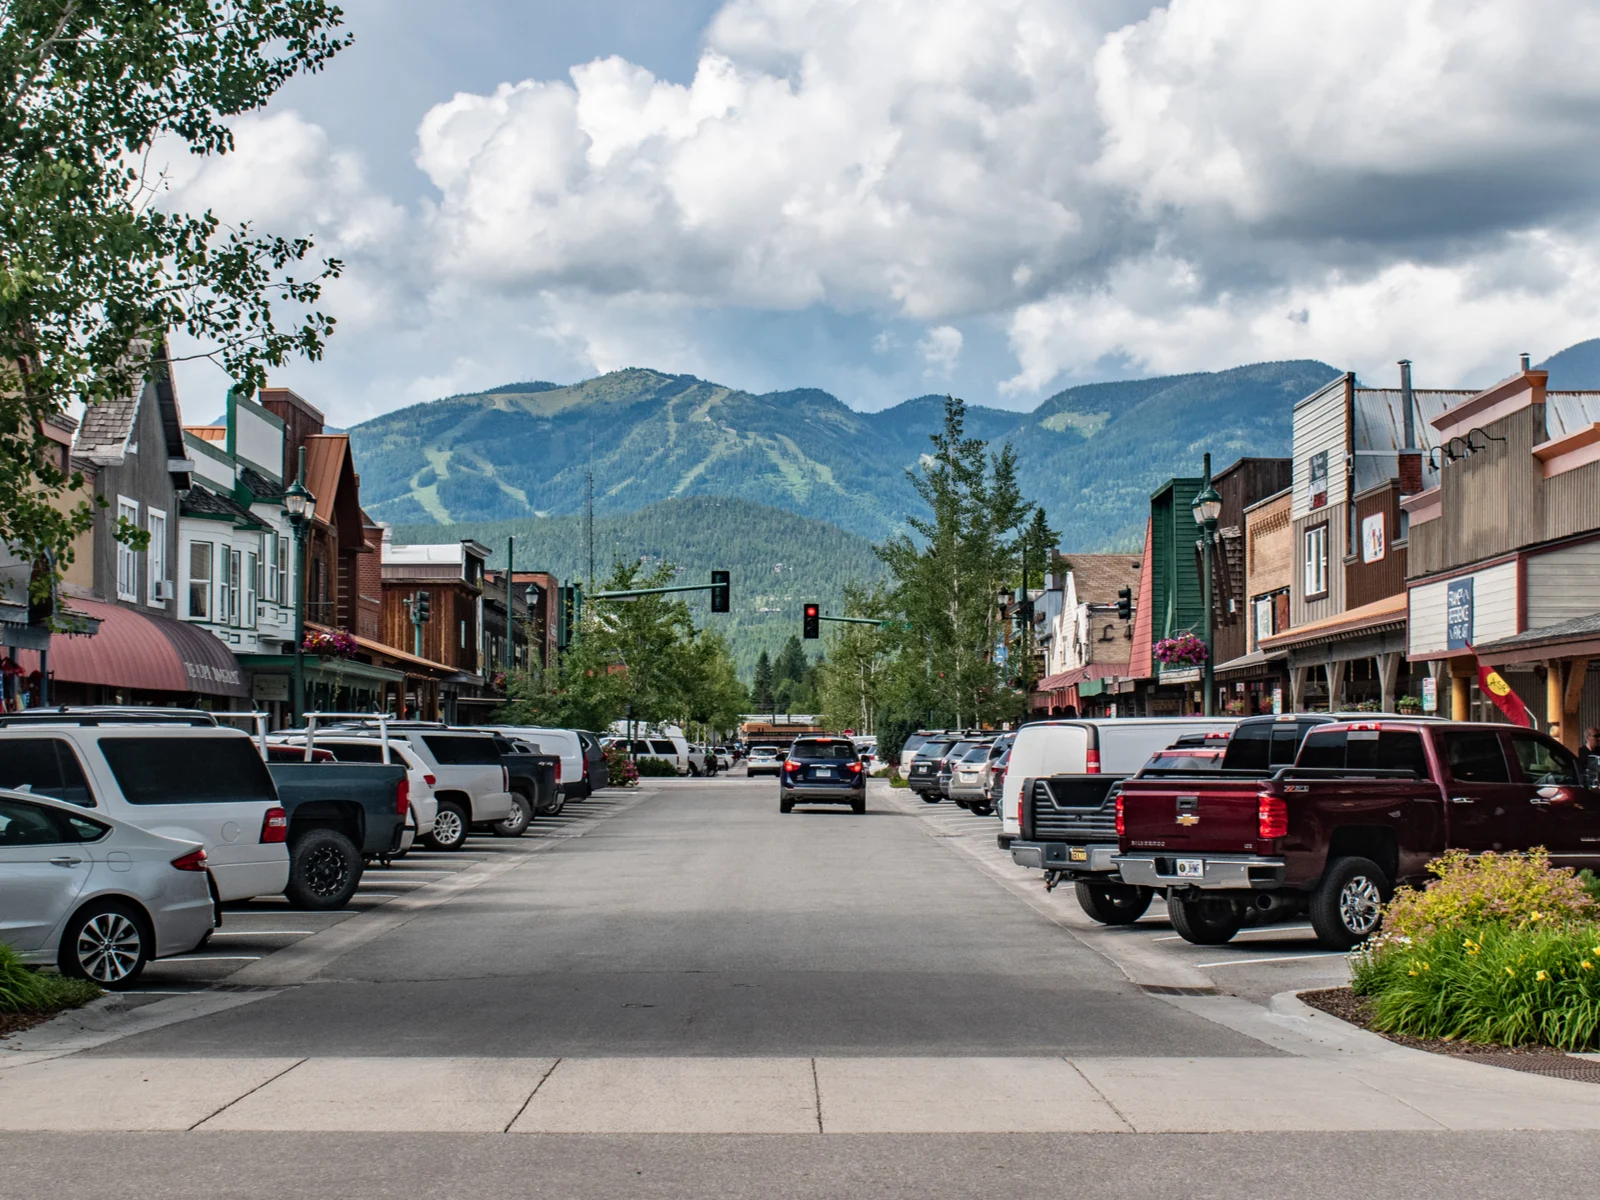 Whitefish, one of the best places to visit in Montana, as seen from the historic downtown shopping area